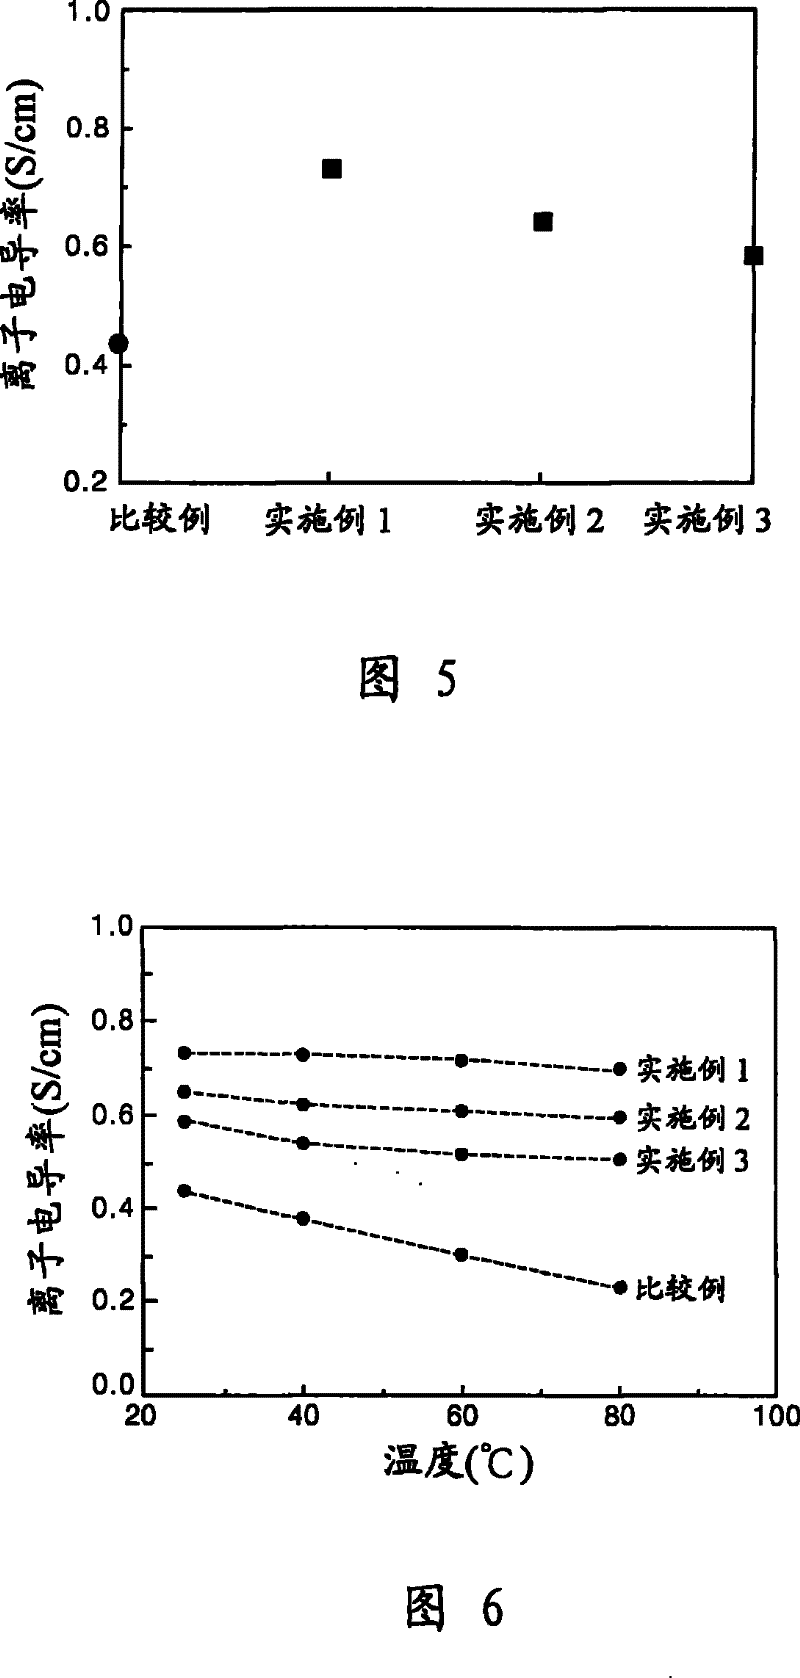 Aqeuous electrolyte composition and sealed-type primary film battery including electrolyte layer formed of the aqueous electrolyte composition